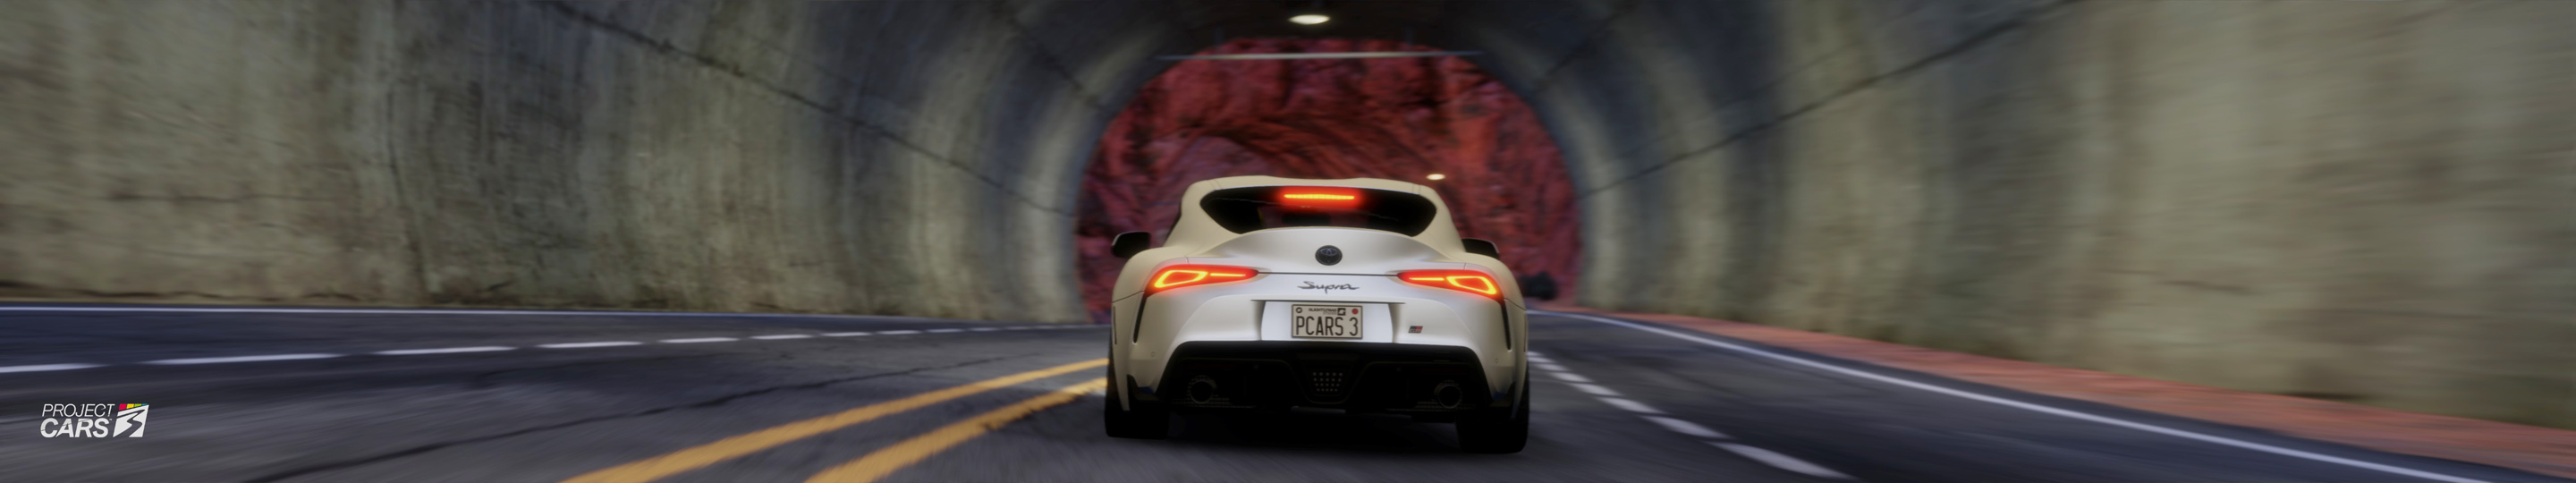 4 PROJECT CARS 3 MONUMENT CANYON with PIR RANGE CARS copy.jpg